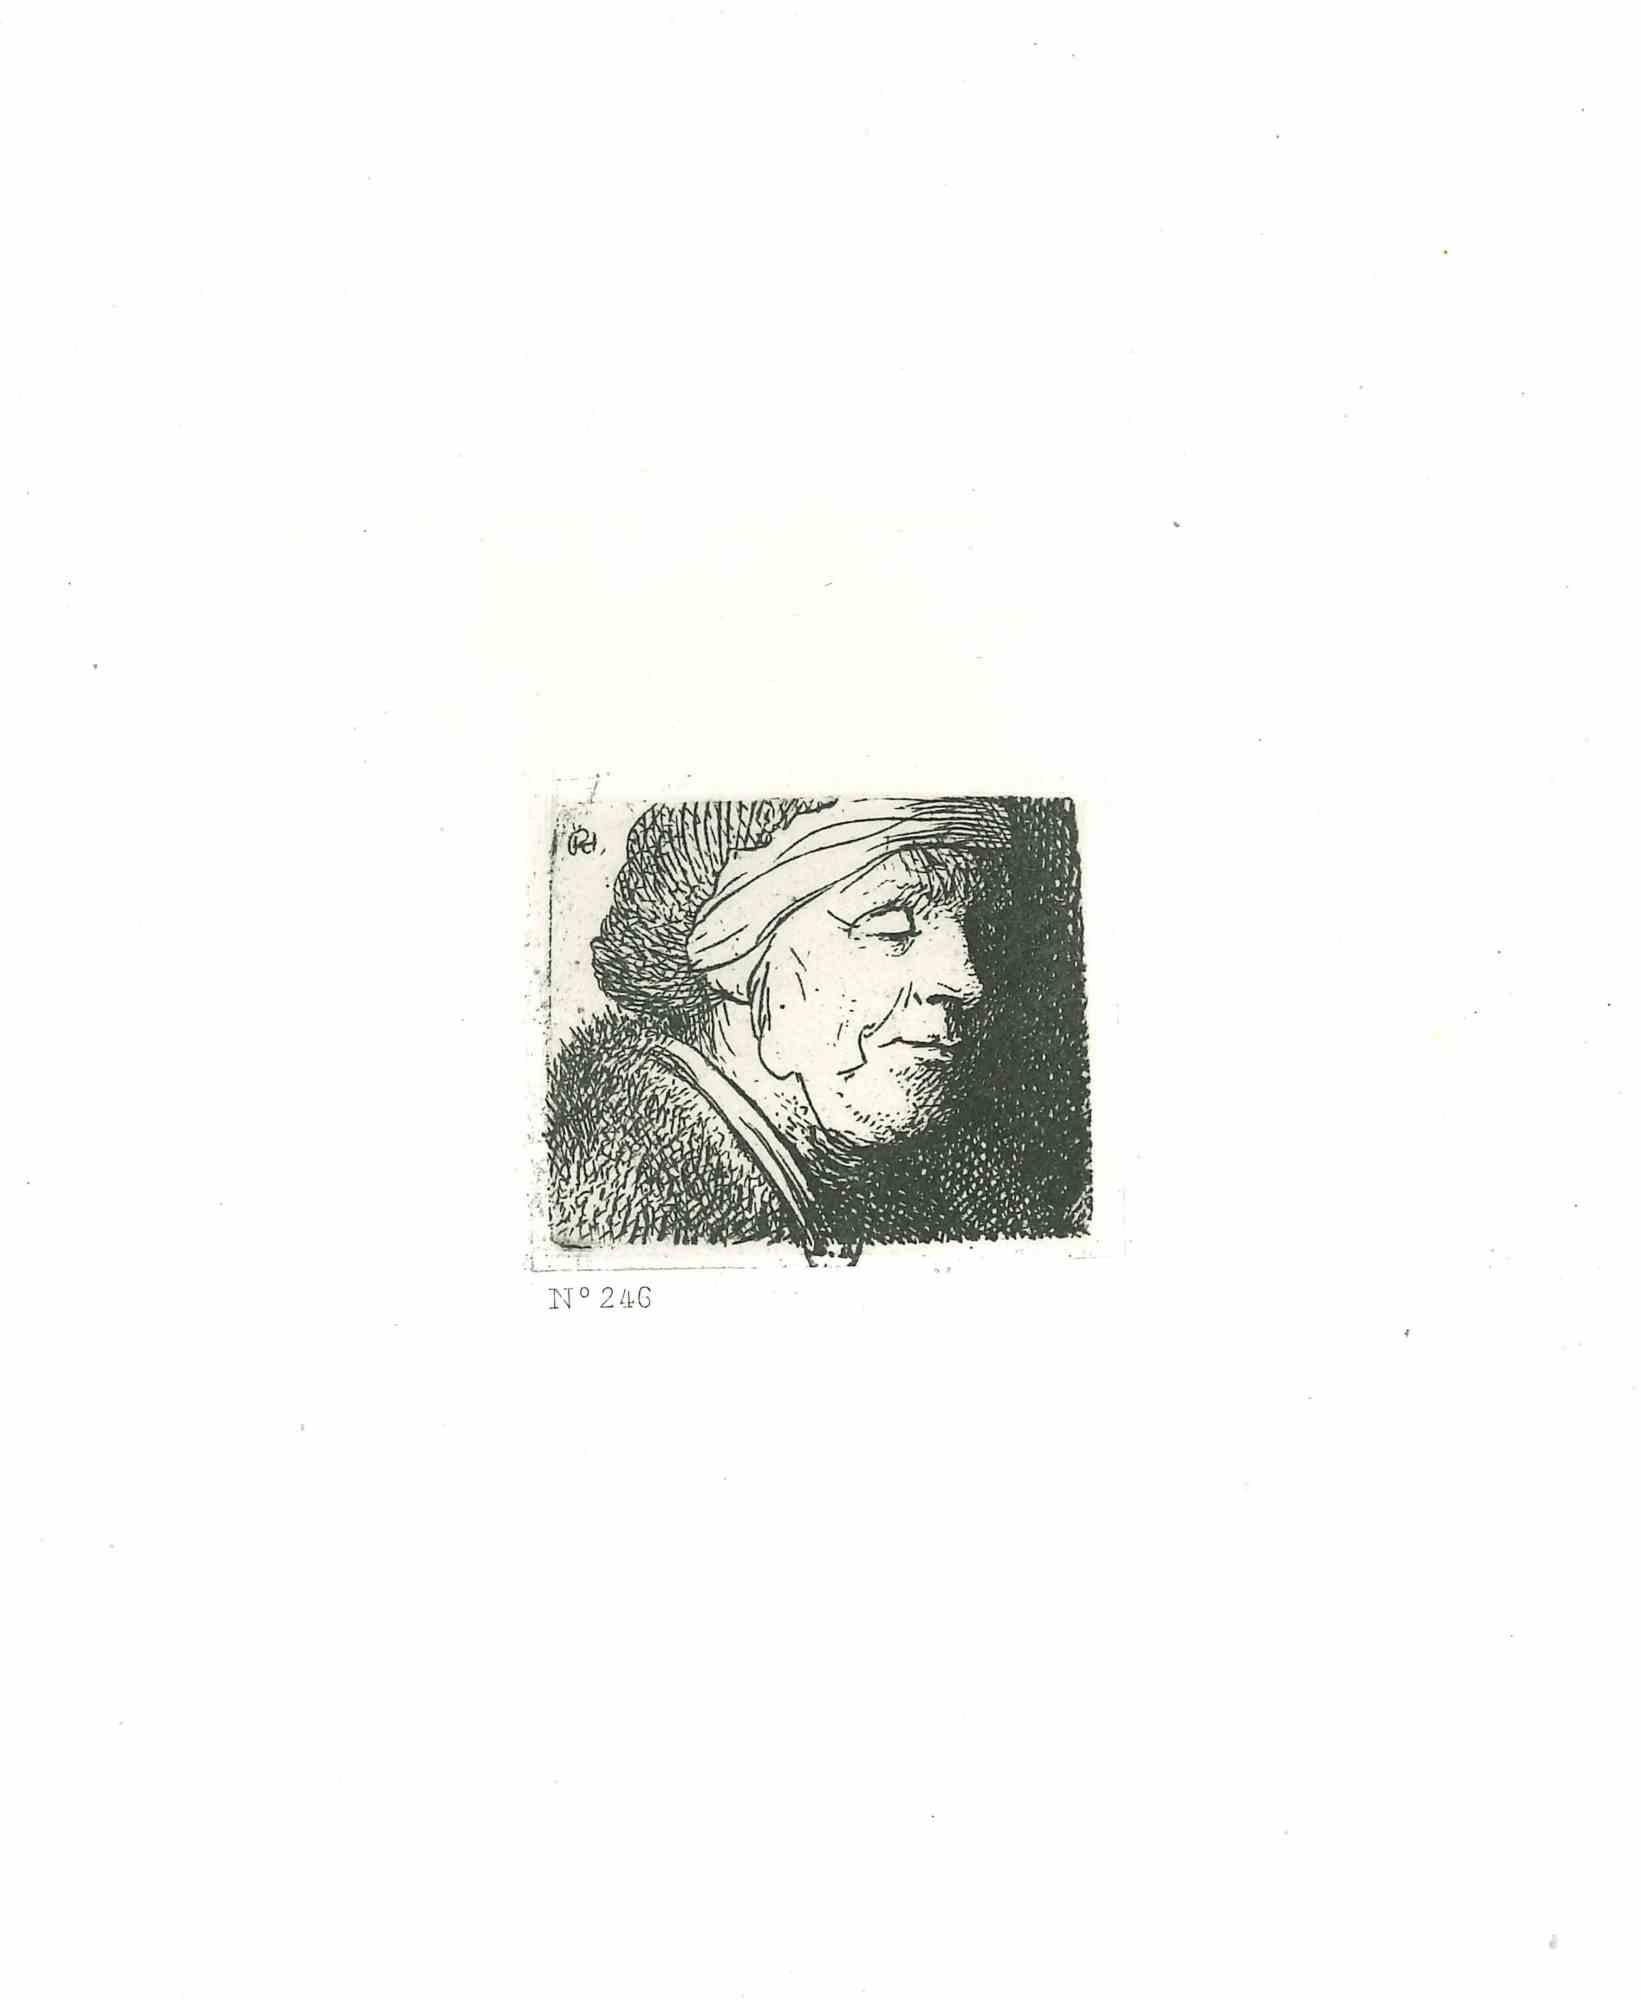 Charles Amand Durand Figurative Print - Bust of an Old Woman - Engraving after Rembrandt - 19th Century